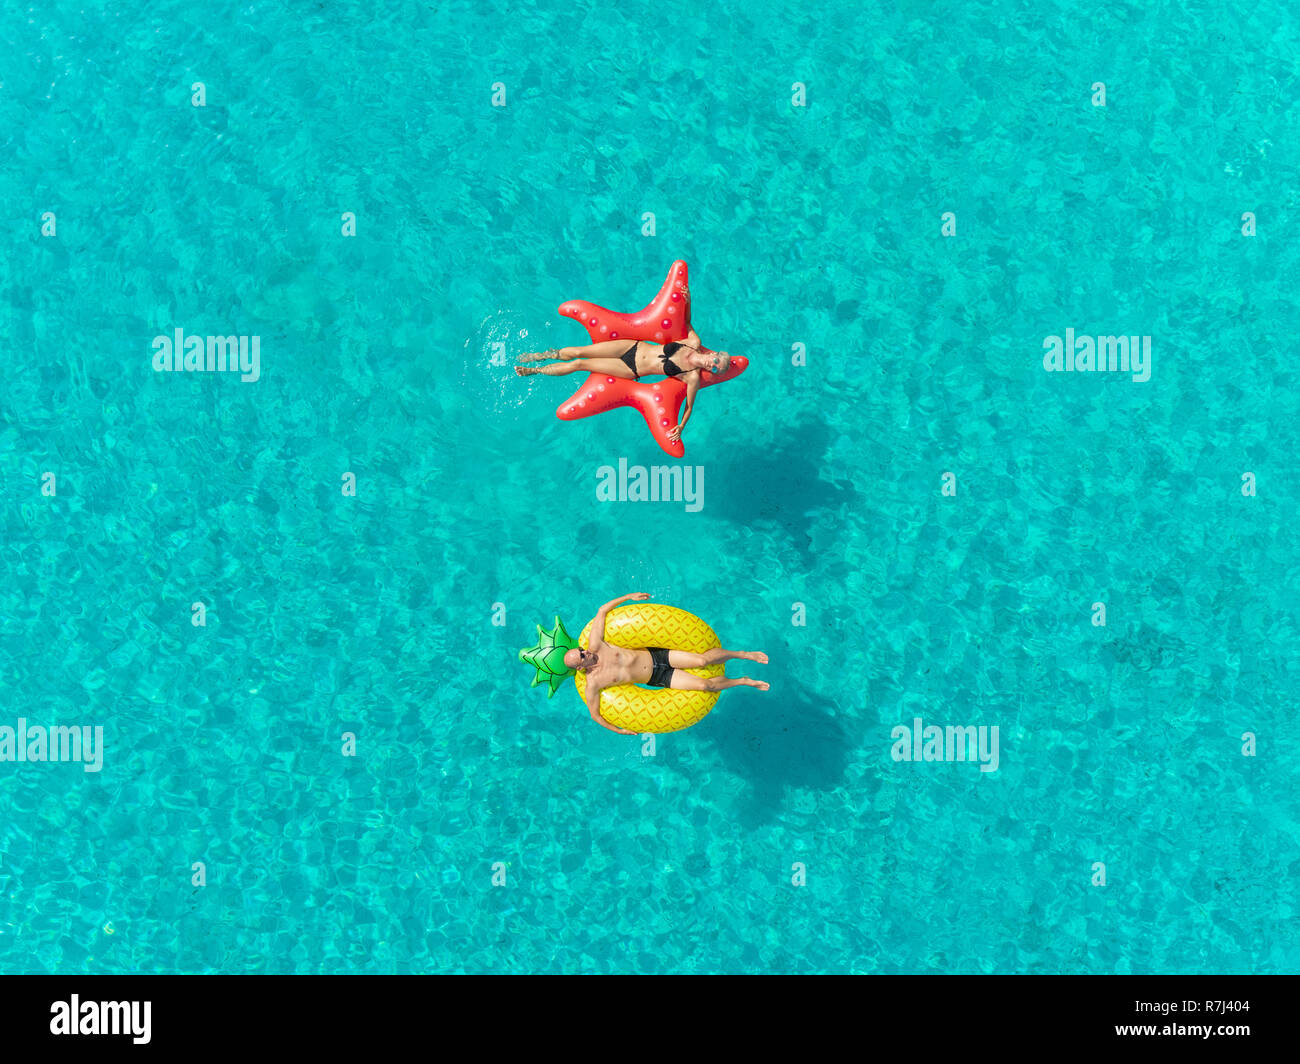 Aerial close up view of couple floating on inflatable star and pineapple shaped mattresses holding hands. Stock Photo